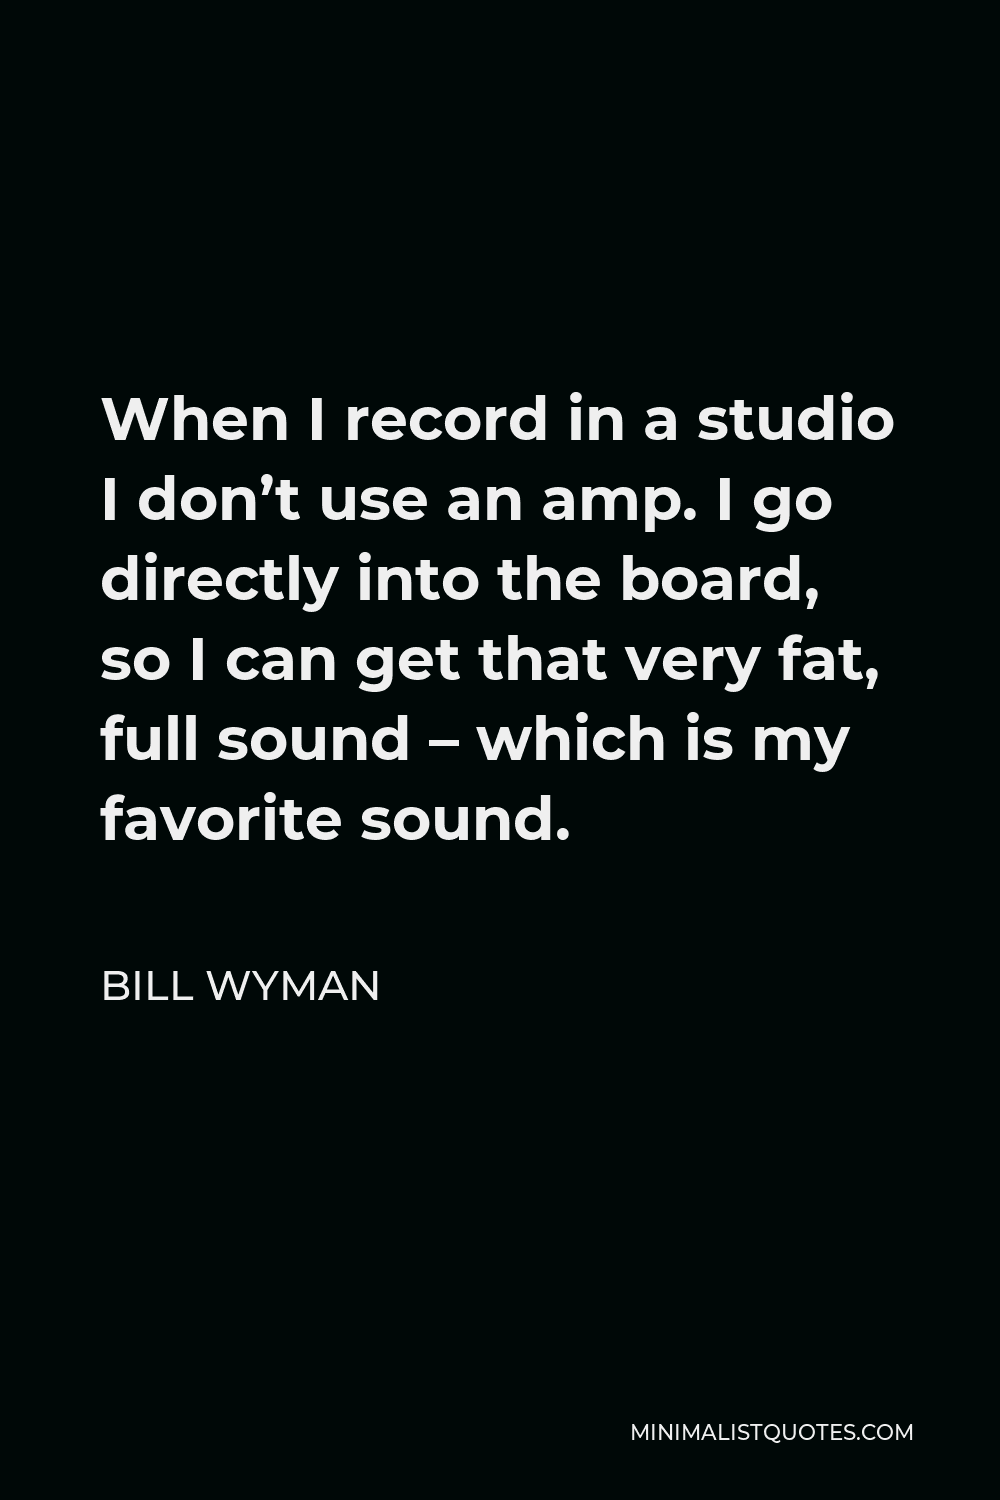 Bill Wyman Quote - When I record in a studio I don’t use an amp. I go directly into the board, so I can get that very fat, full sound – which is my favorite sound.